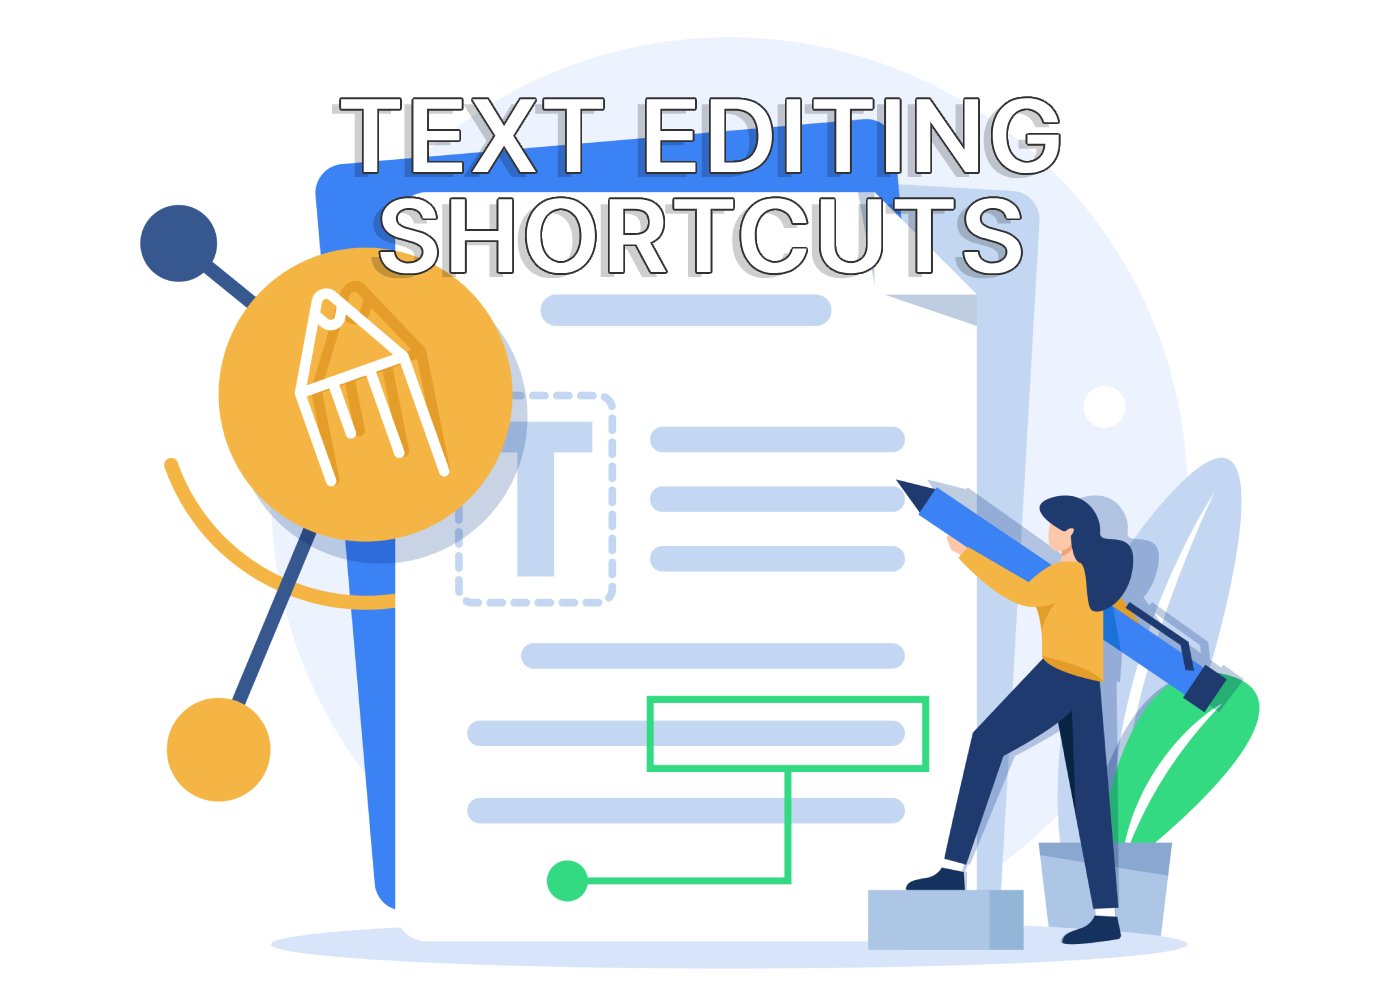 Keyboard shortcuts to speed through text editing in a document